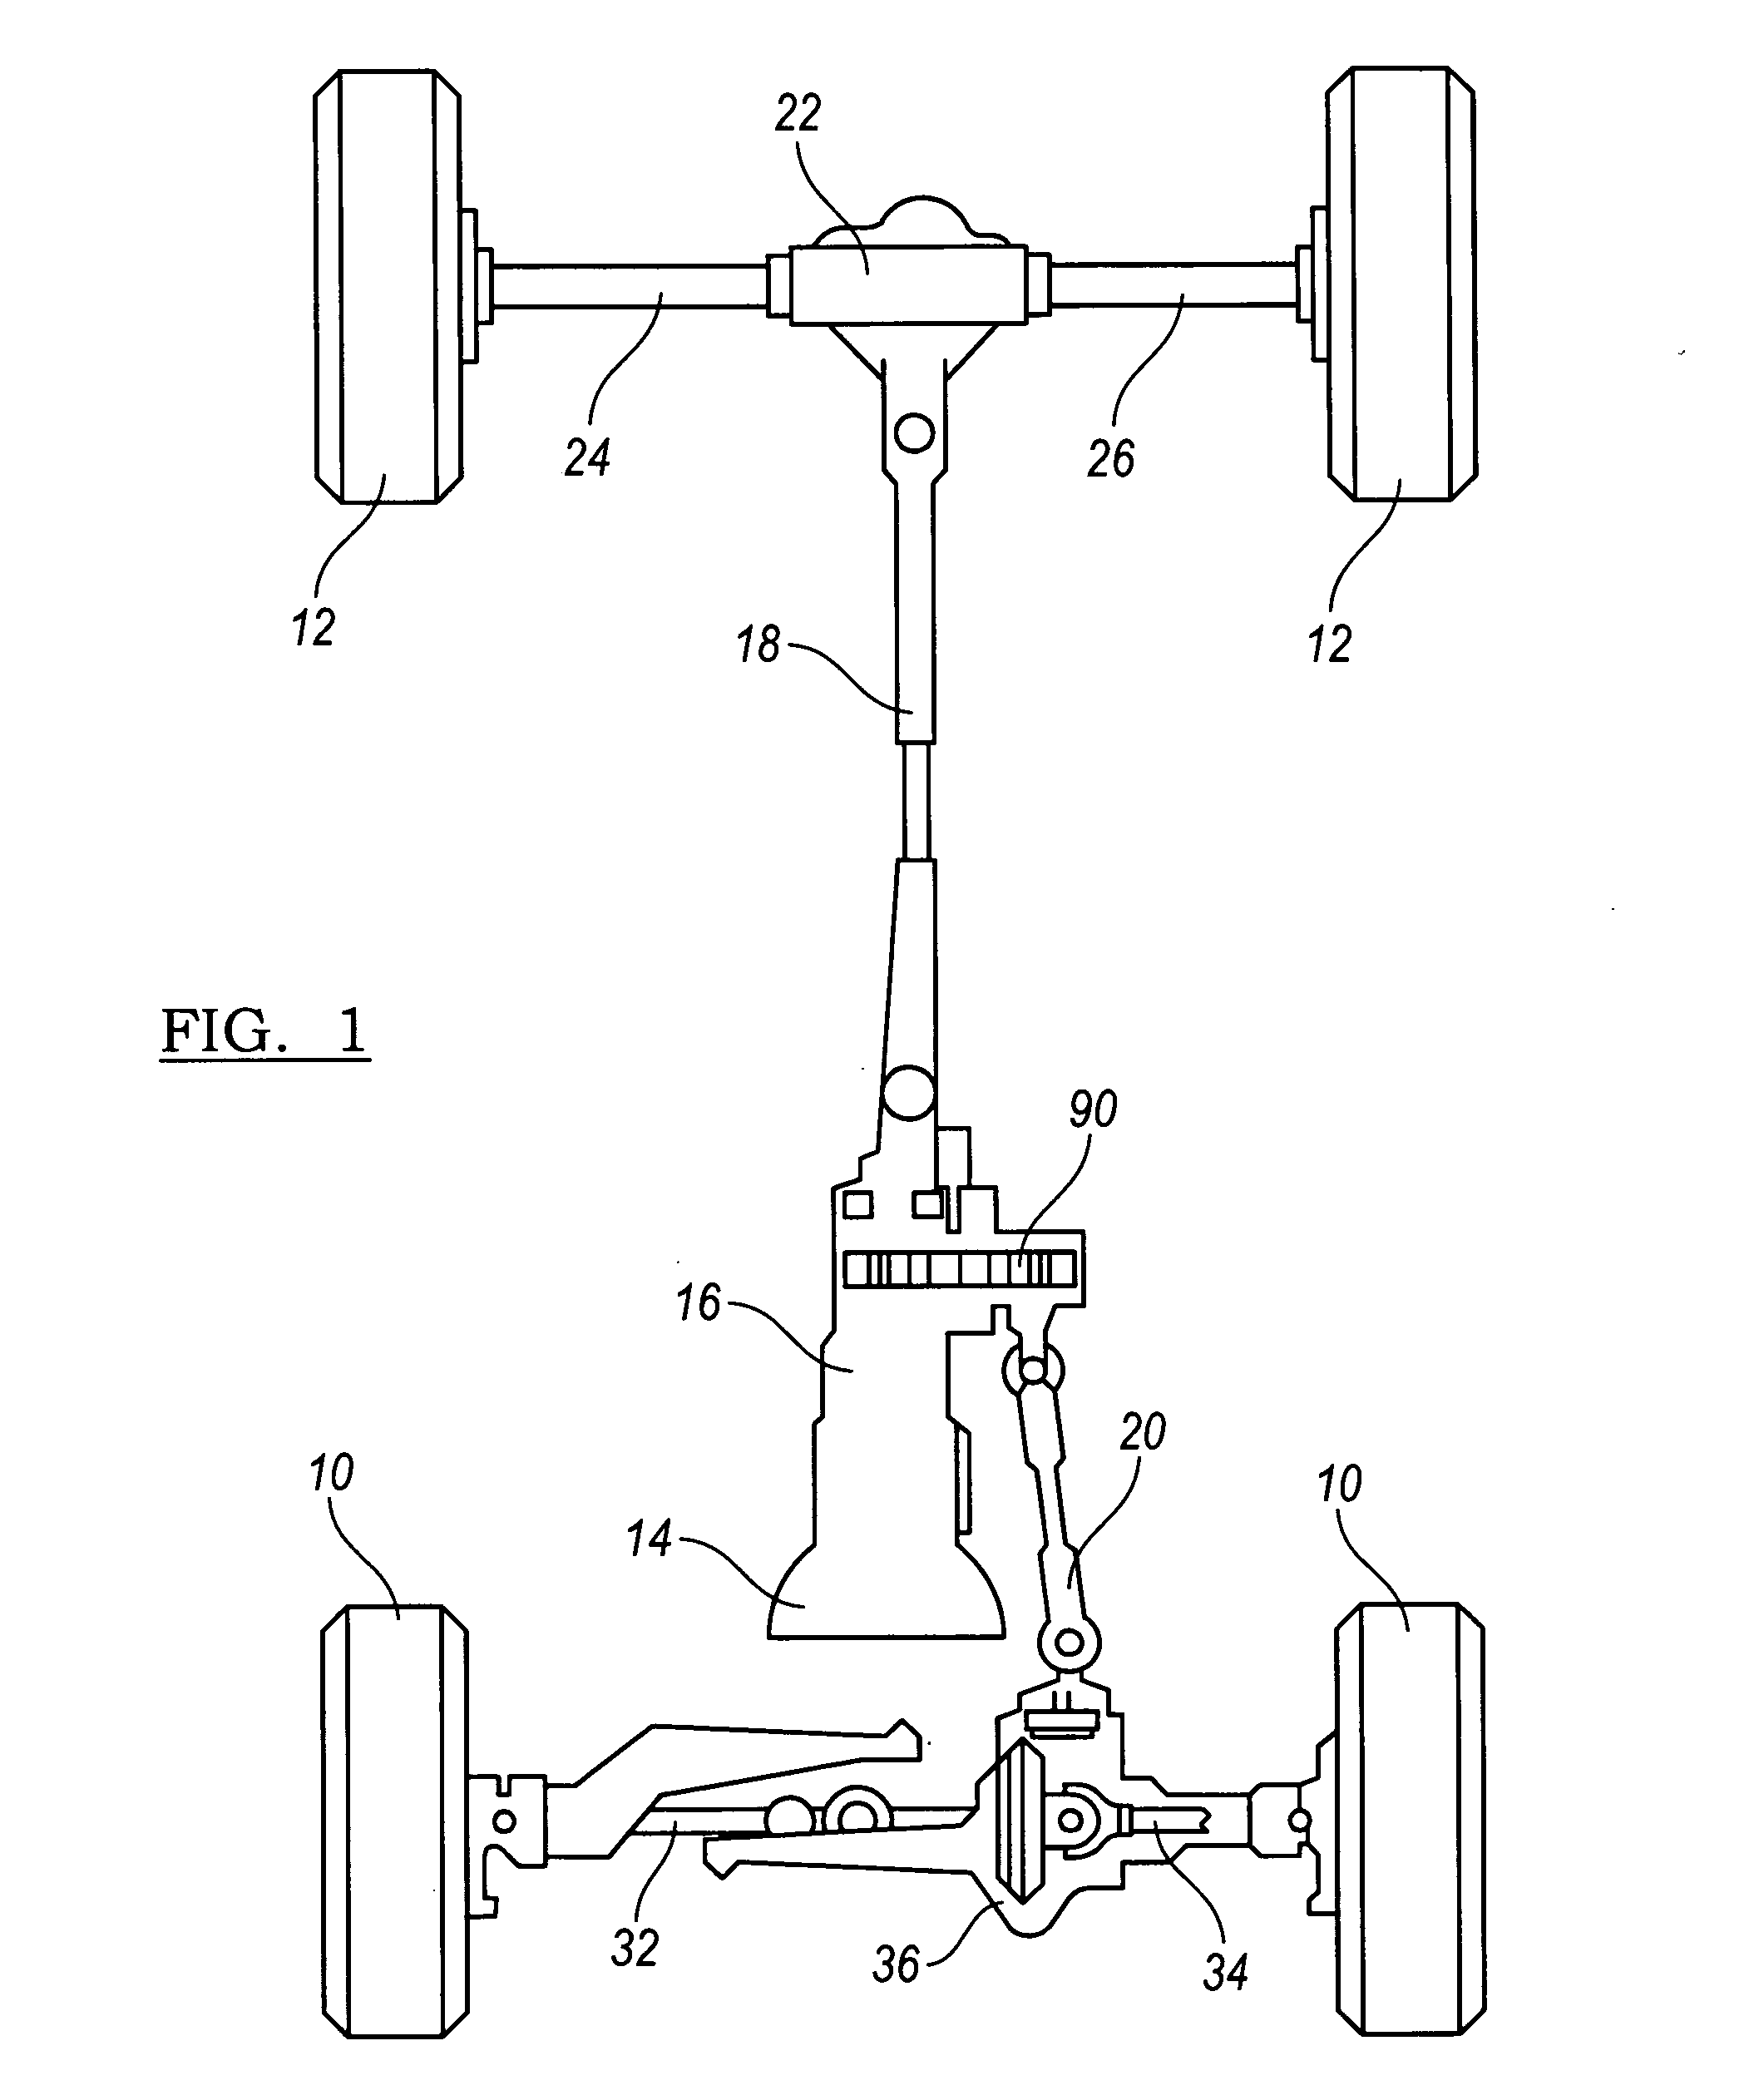 Prevention of inadvertent inertial engagement of a transfer case clutch